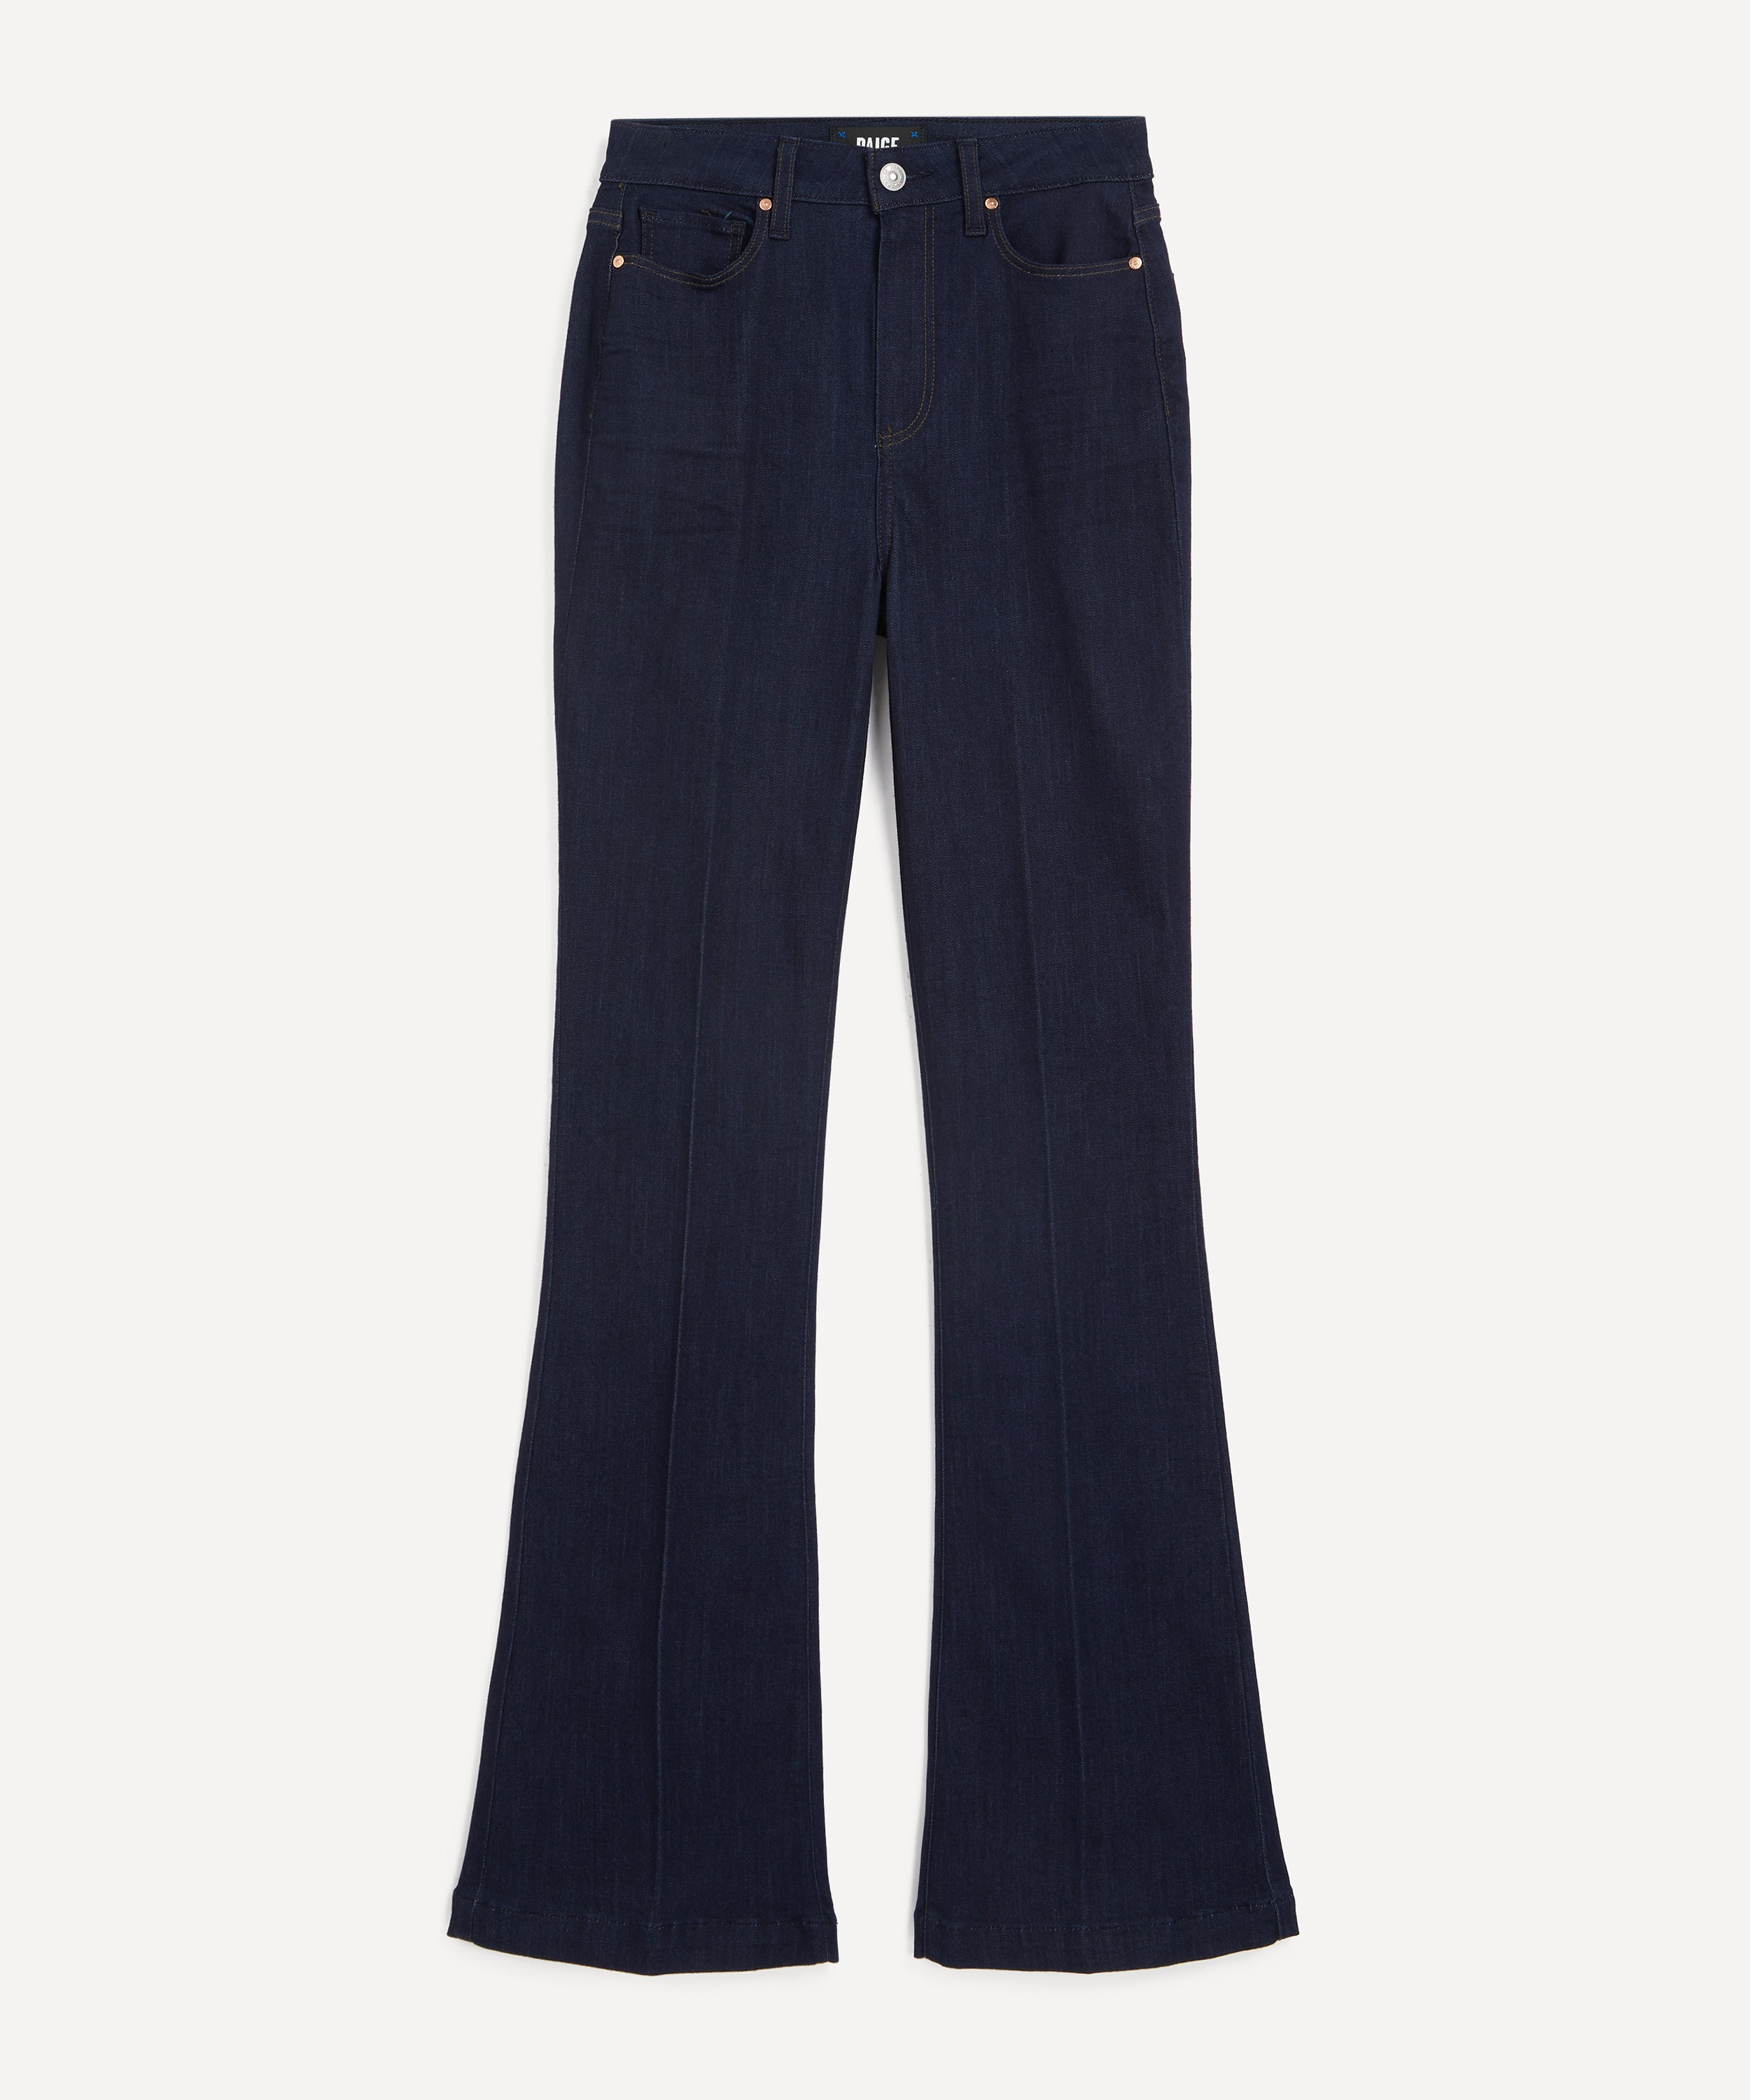 Paige - Iconic Flaunt Denim High Rise Flare Jeans image number 0